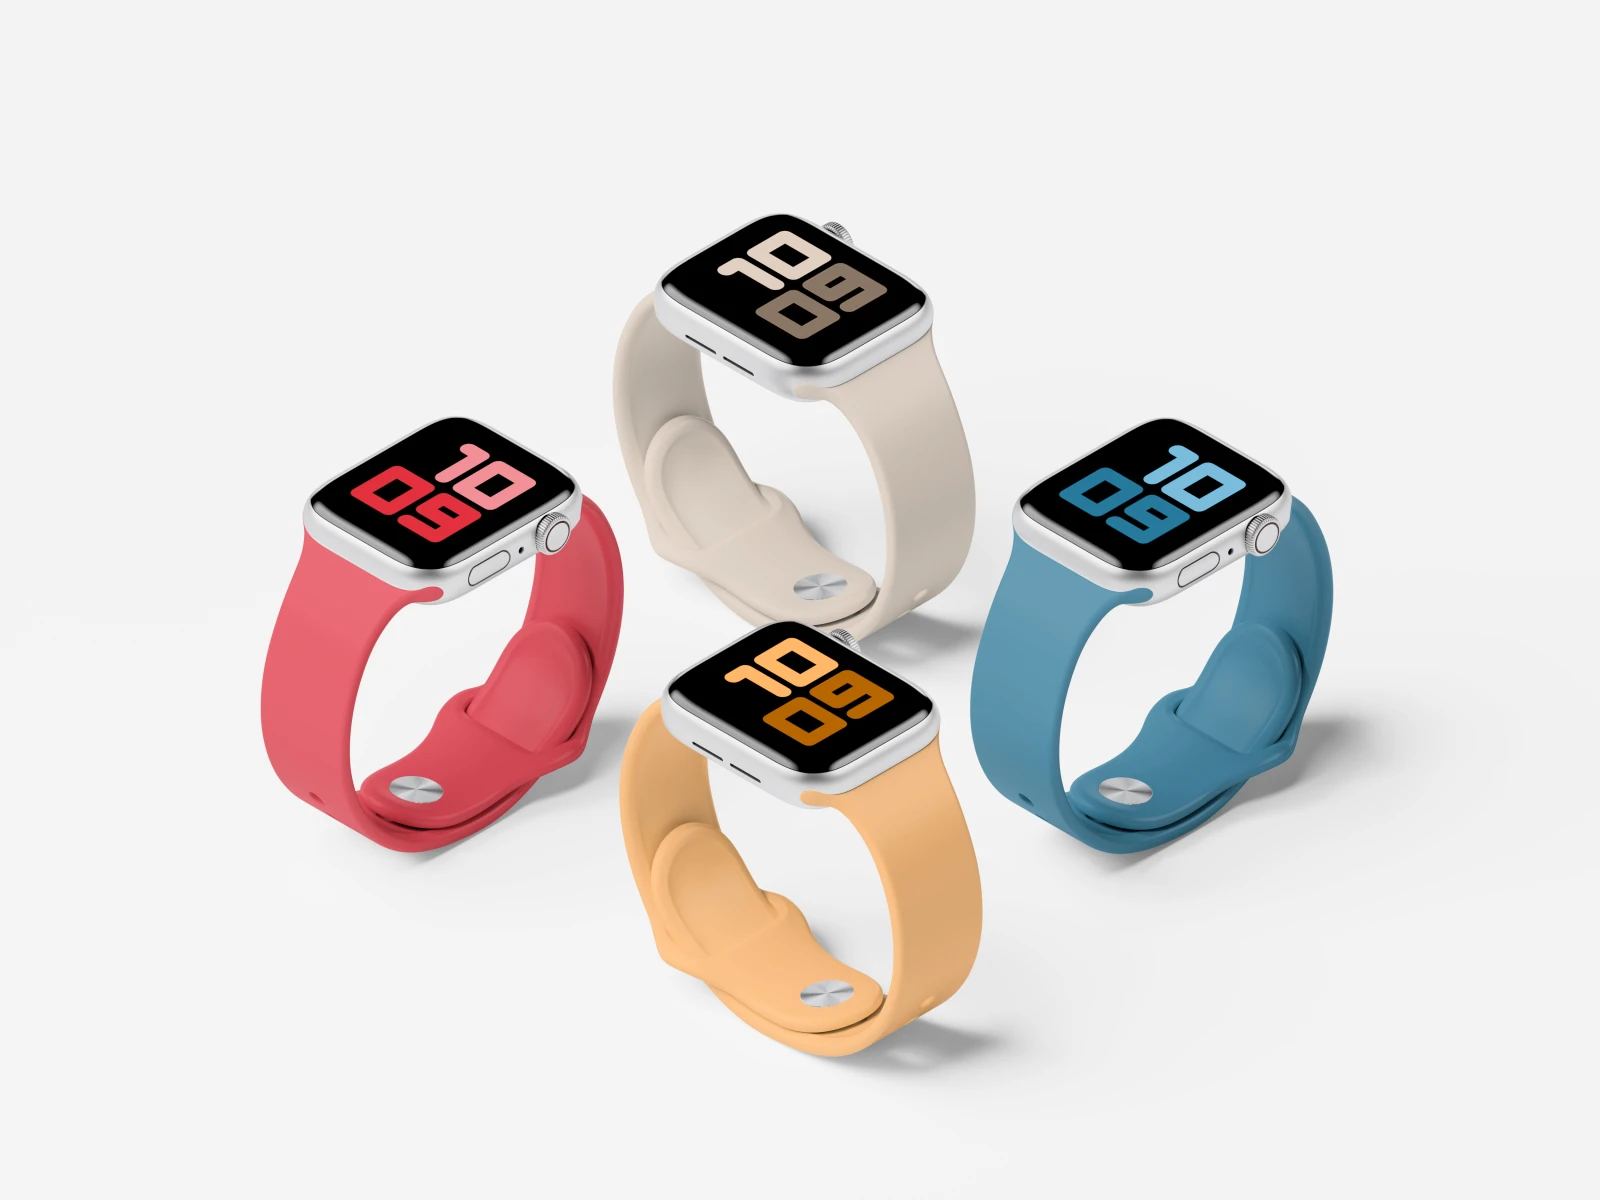 Apple Watch Series 5 Set Mockup - Use this Apple Watch Series 5 to showcase your app designs.